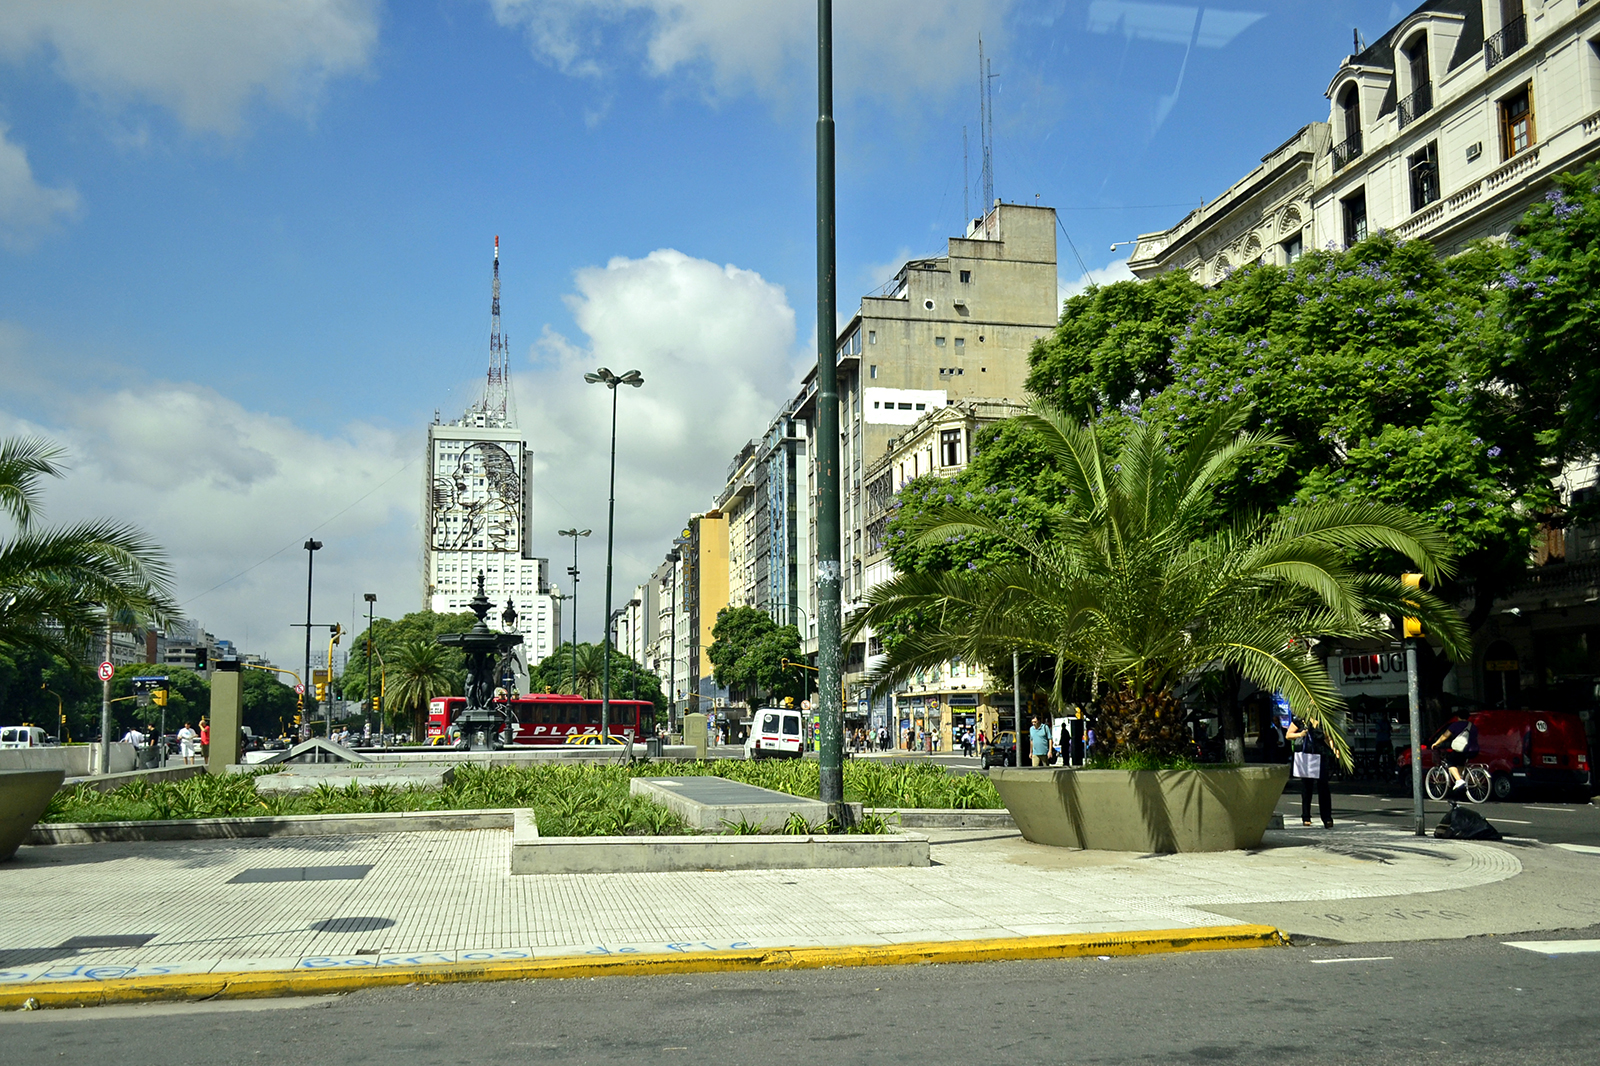 city with trees and tall buildings along the road